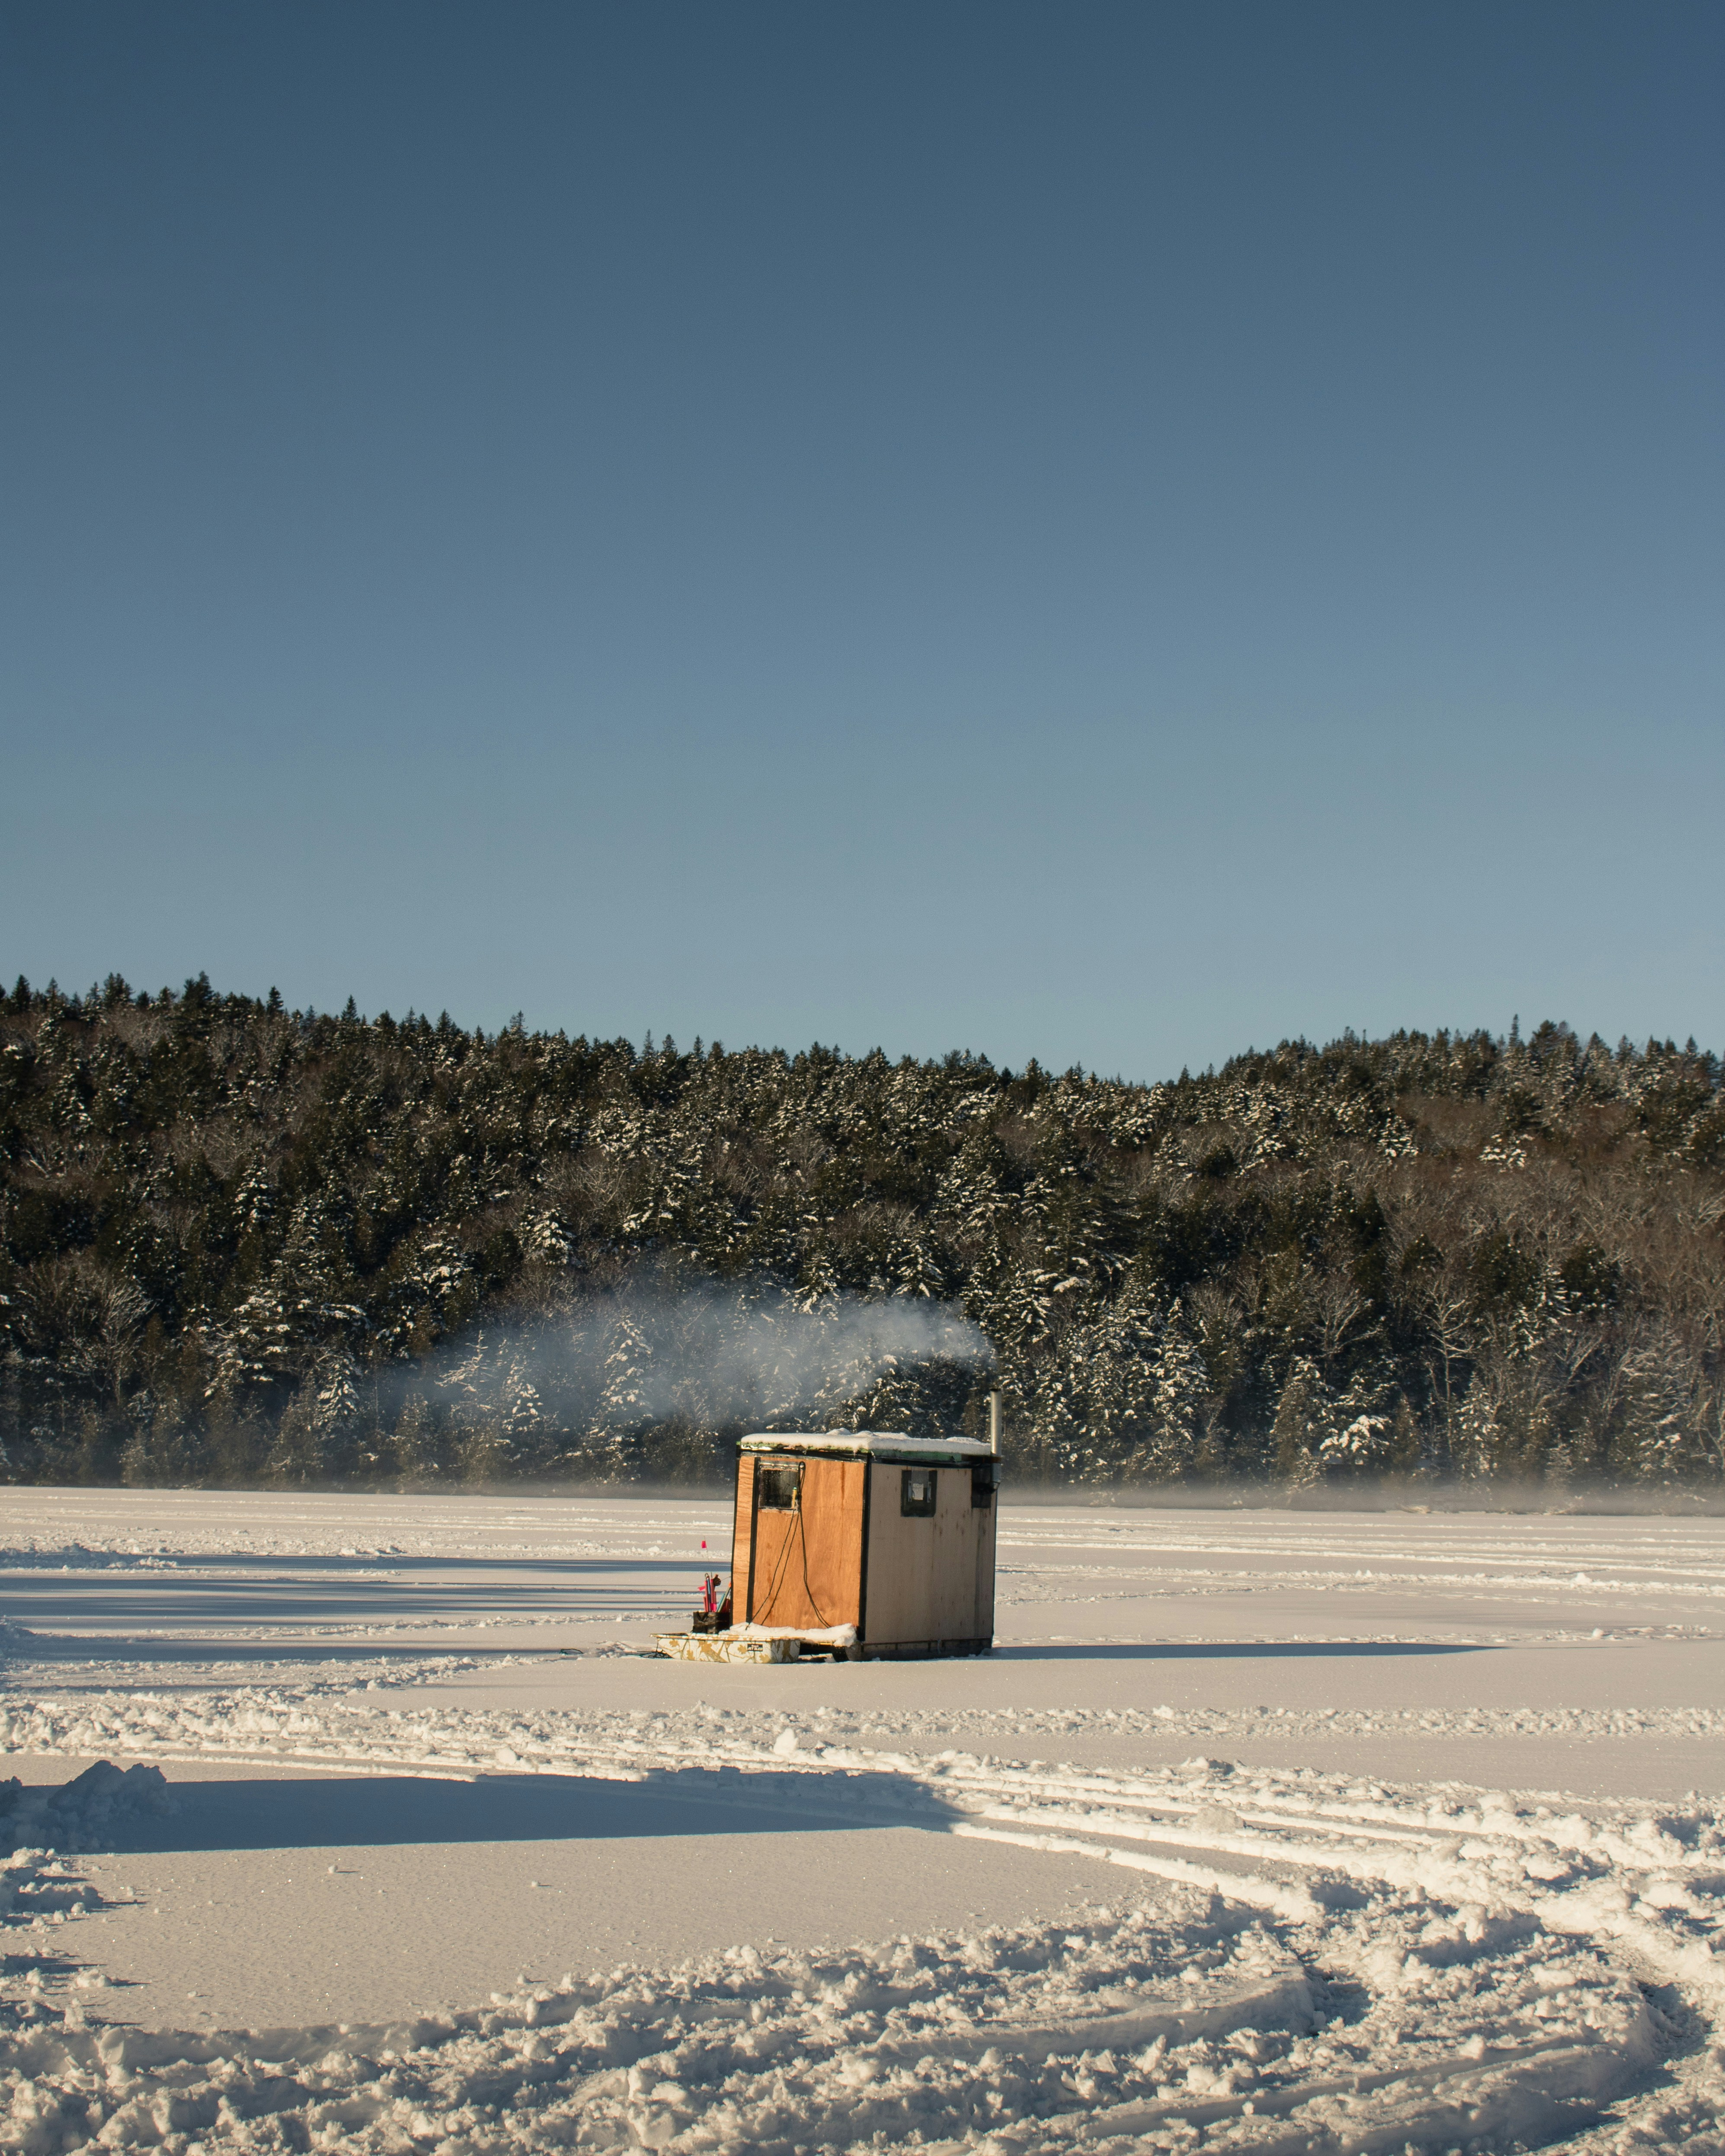 Mild temperatures forcing this Vaudreuil-Dorion ice fishing operator to rethink his business